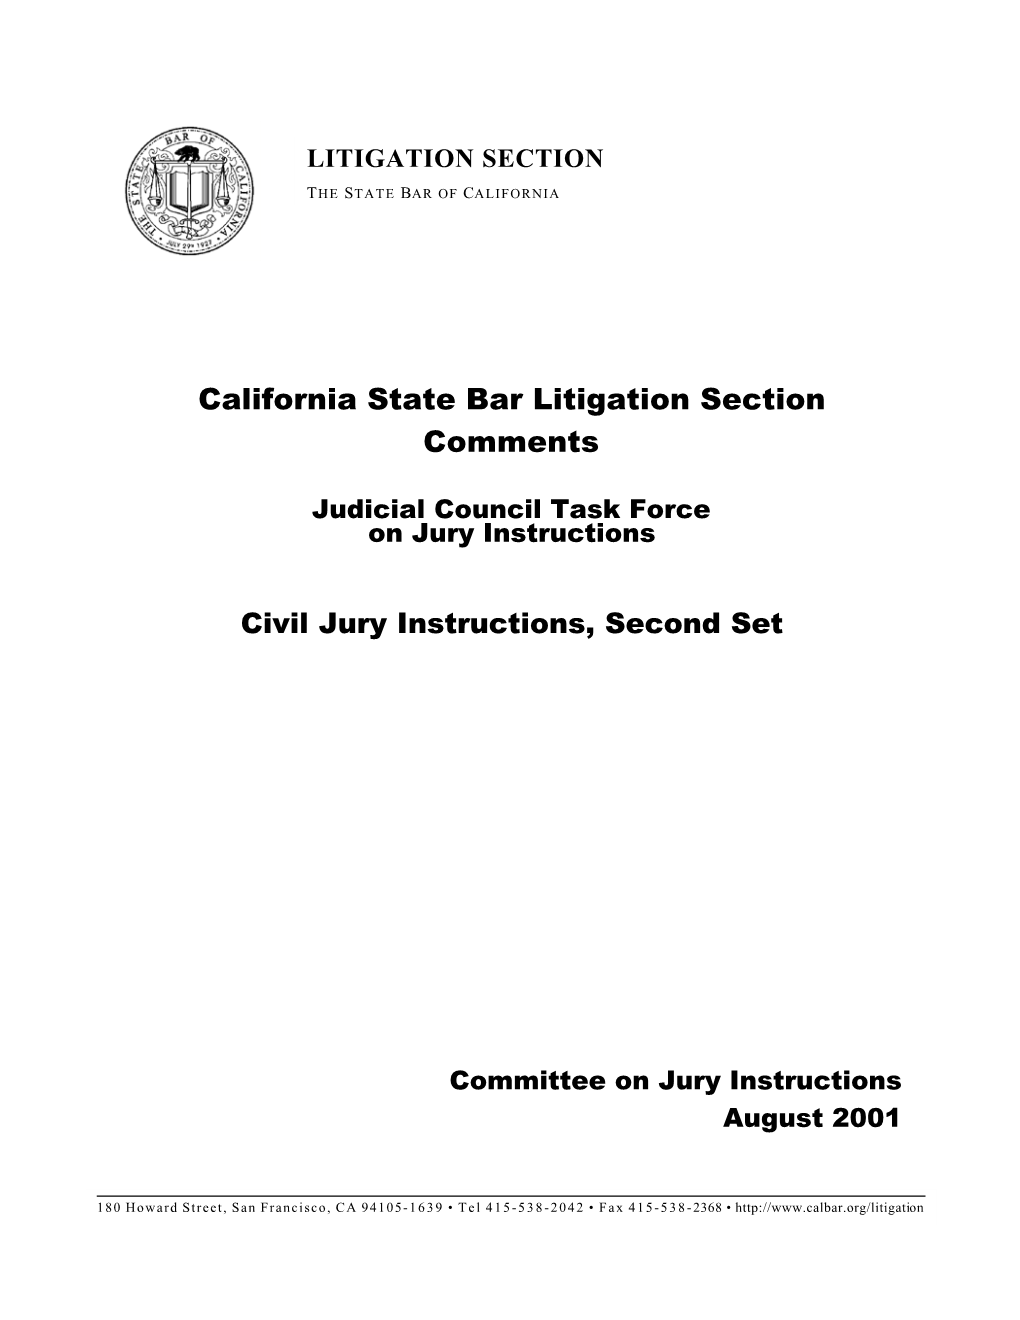 California State Bar Litigation Section Comments